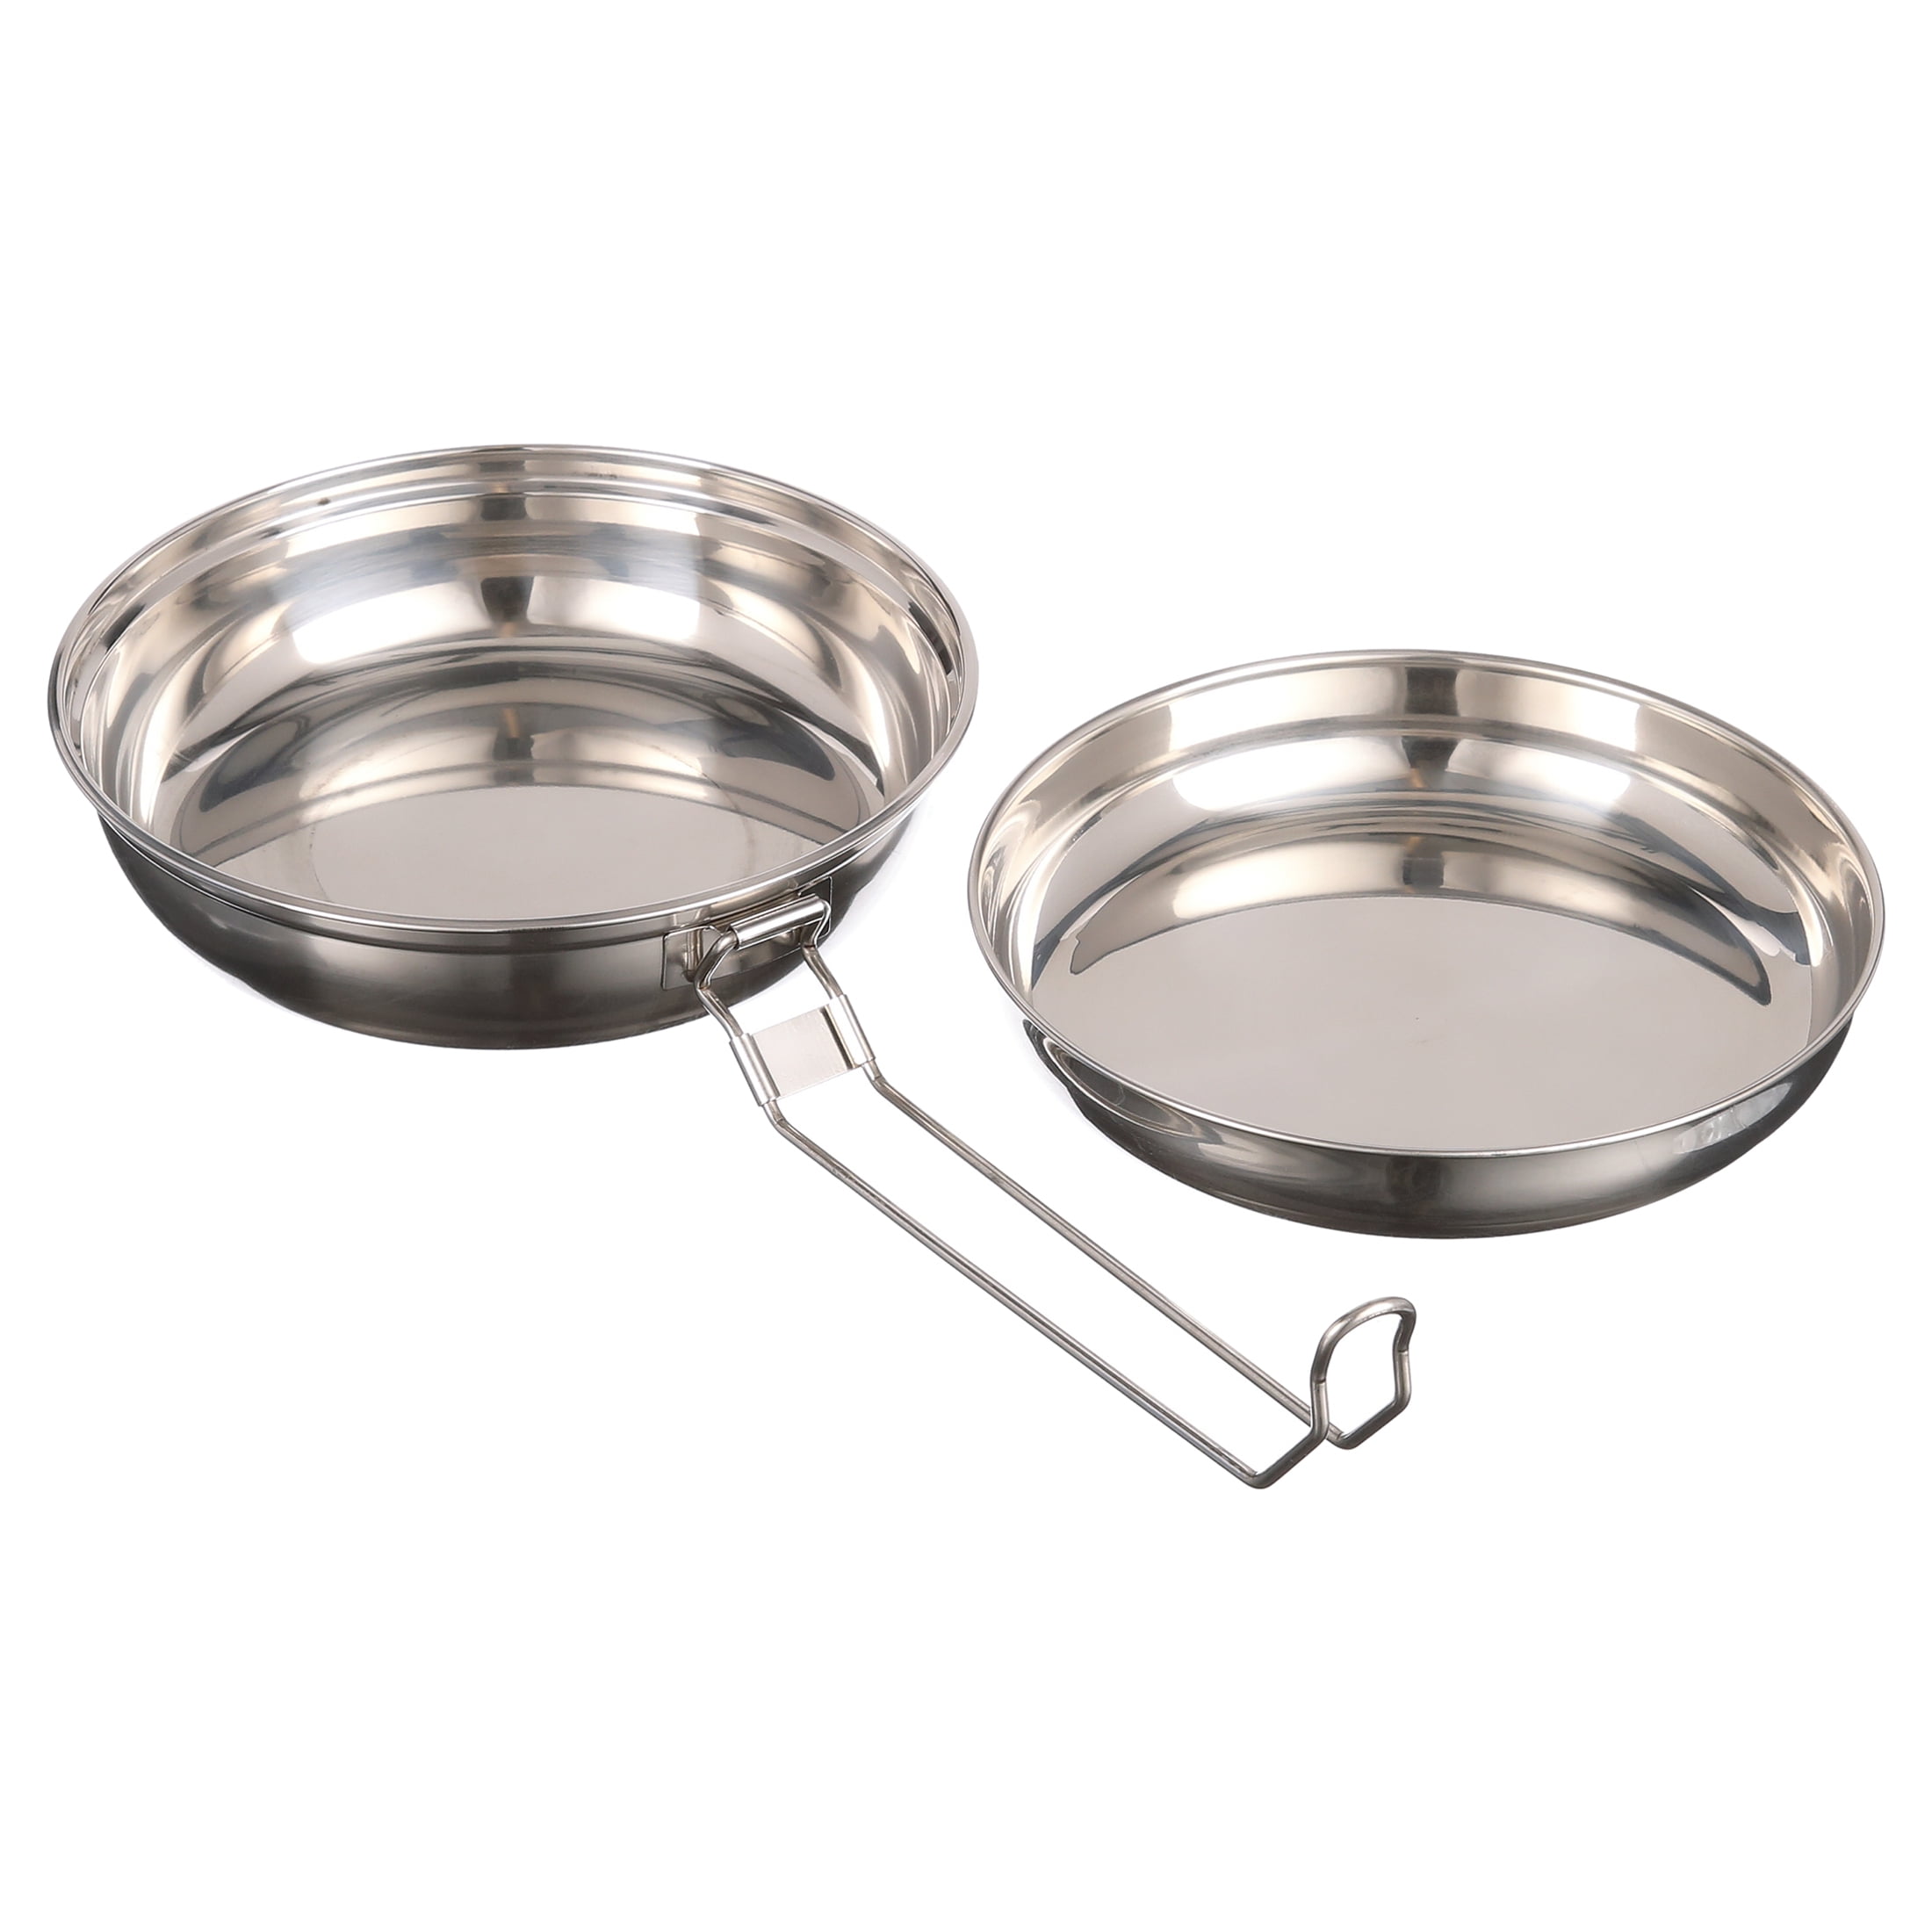 Stanley Camp Cook Set Mess Kit Stainless Steel Pot Pan w/Bowls & Lids 10  Piece